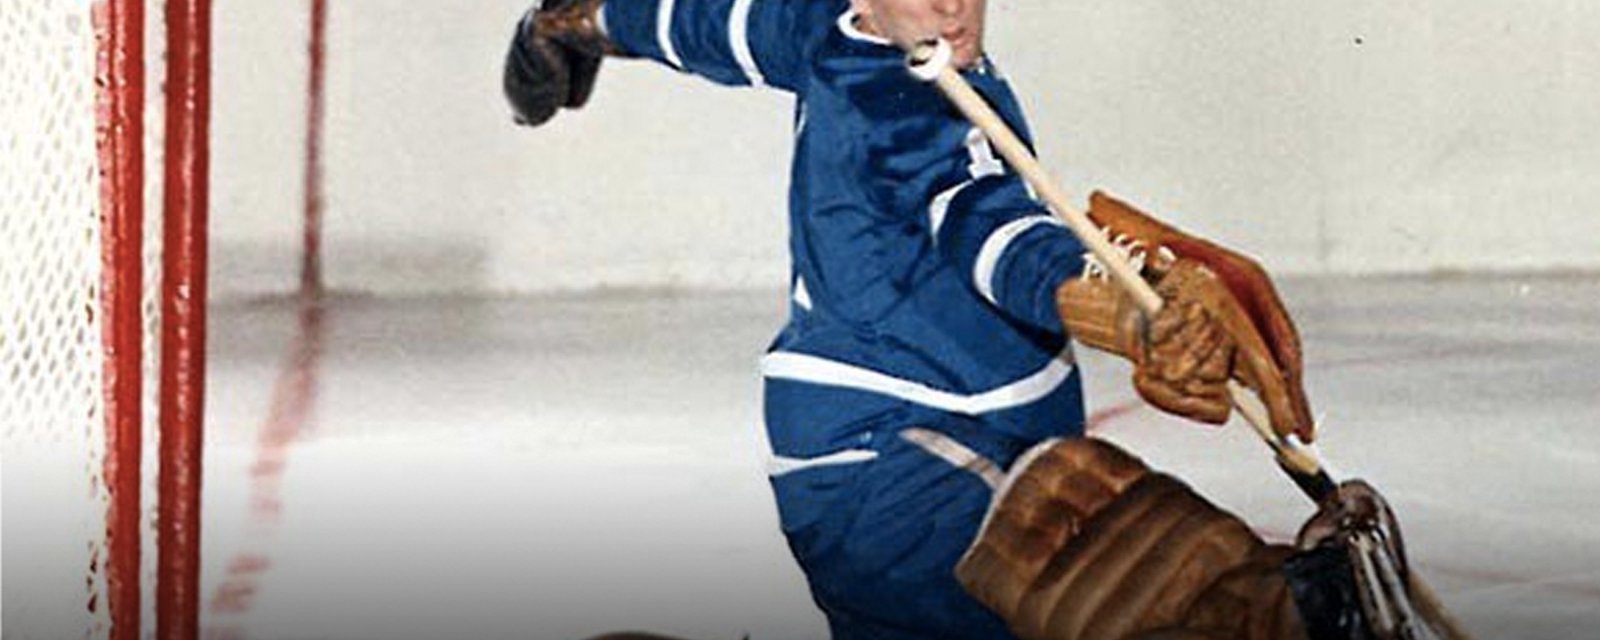 Breaking: Leafs announce details of “Celebration of Life” commemorating Johnny Bower